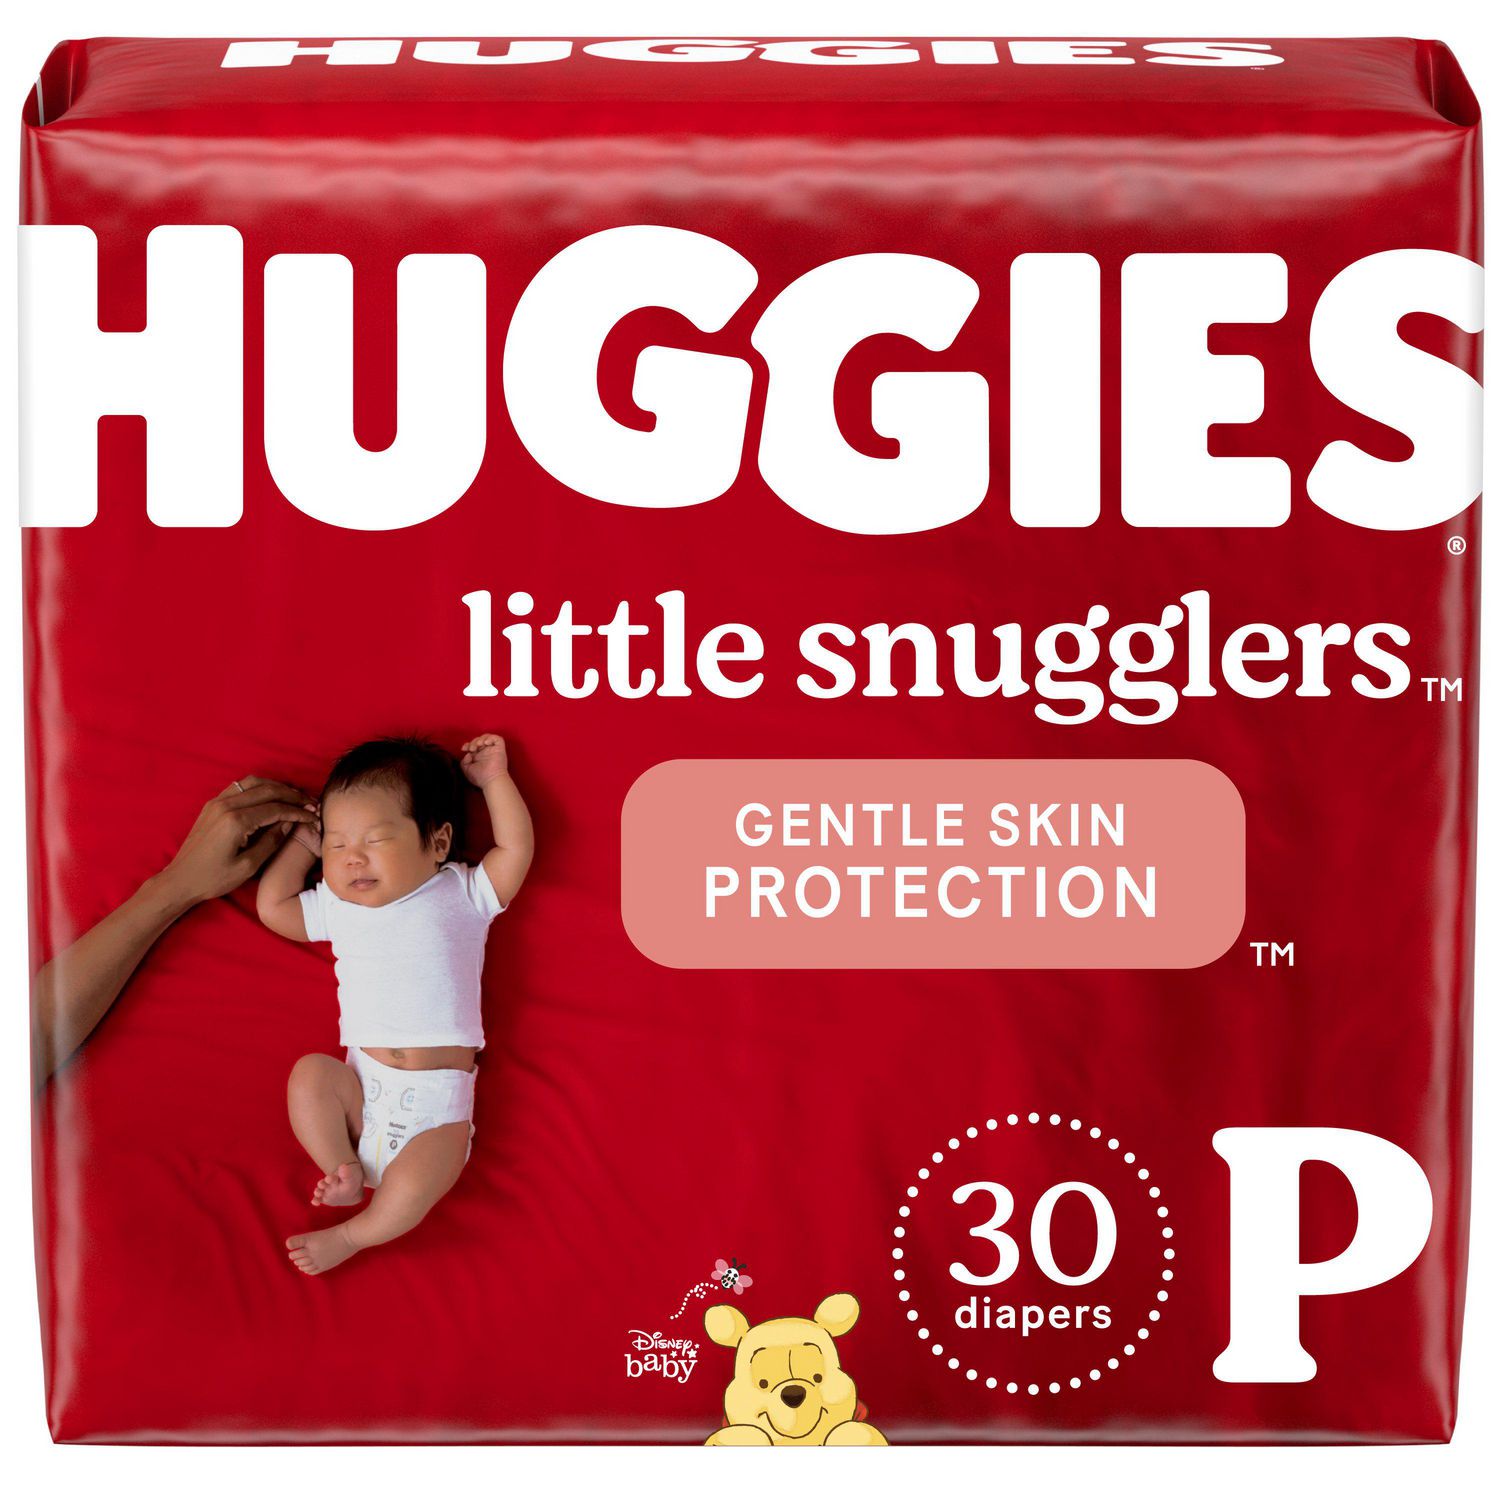 Parents Love These Walmart Diapers & They're UNDER $5!